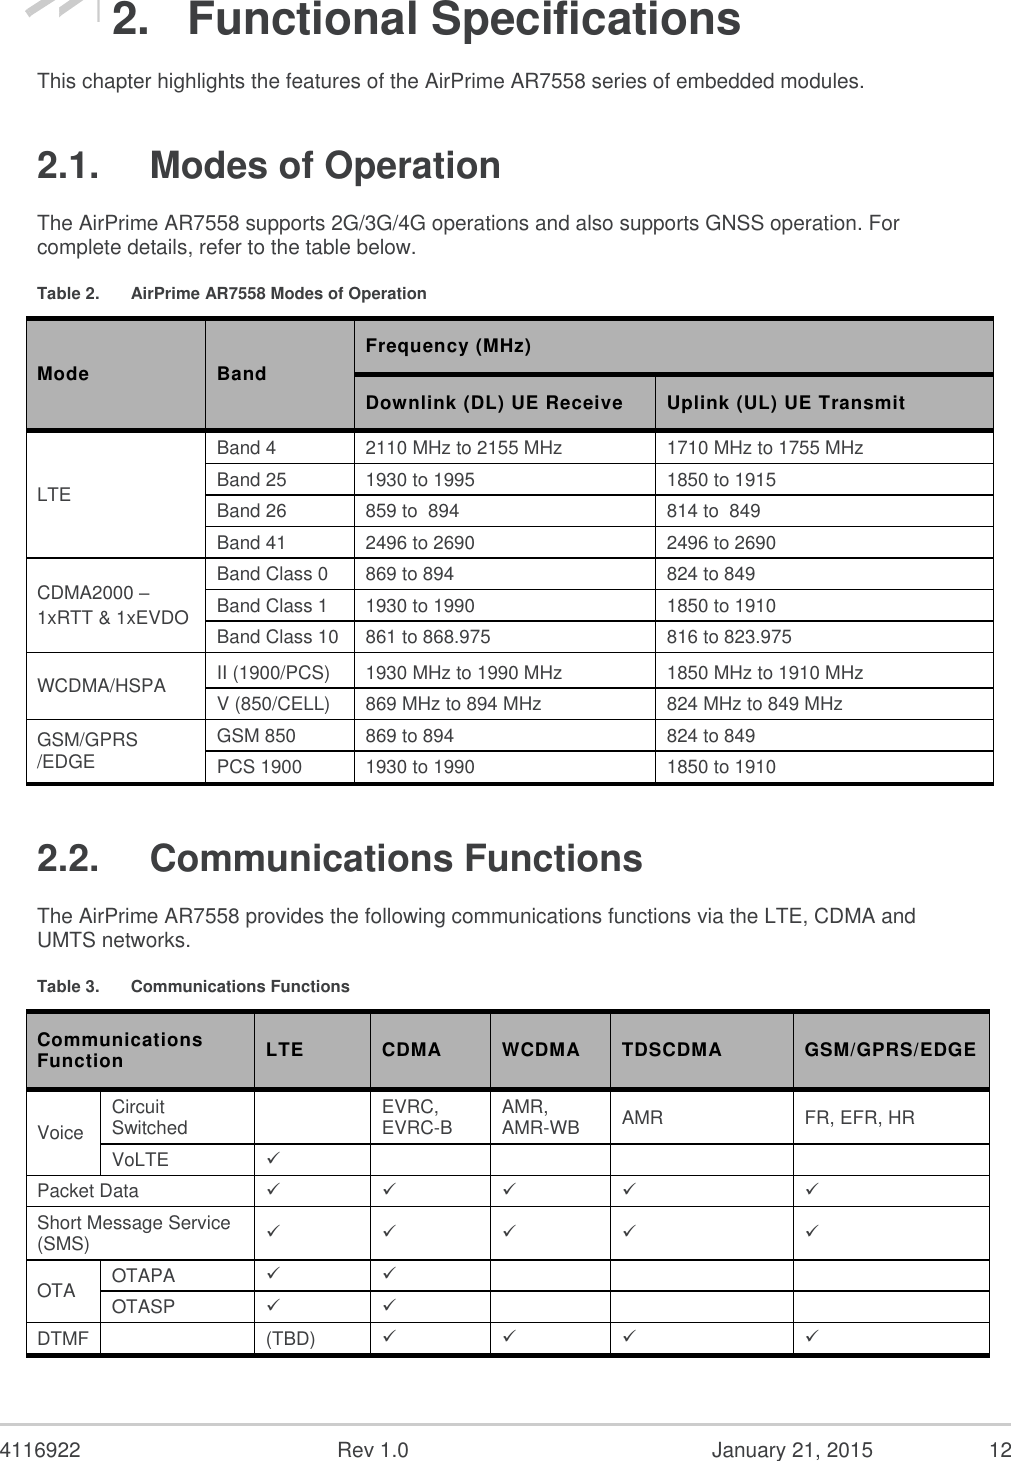  4116922  Rev 1.0  January 21, 2015  12 2.  Functional Specifications This chapter highlights the features of the AirPrime AR7558 series of embedded modules. 2.1.  Modes of Operation The AirPrime AR7558 supports 2G/3G/4G operations and also supports GNSS operation. For complete details, refer to the table below. Table 2.  AirPrime AR7558 Modes of Operation Mode Band Frequency (MHz) Downlink (DL) UE Receive Uplink (UL) UE Transmit LTE Band 4 2110 MHz to 2155 MHz 1710 MHz to 1755 MHz Band 25 1930 to 1995 1850 to 1915 Band 26 859 to  894 814 to  849 Band 41 2496 to 2690 2496 to 2690 CDMA2000 –  1xRTT &amp; 1xEVDO Band Class 0 869 to 894  824 to 849  Band Class 1 1930 to 1990  1850 to 1910  Band Class 10 861 to 868.975 816 to 823.975 WCDMA/HSPA II (1900/PCS) 1930 MHz to 1990 MHz 1850 MHz to 1910 MHz V (850/CELL) 869 MHz to 894 MHz 824 MHz to 849 MHz GSM/GPRS /EDGE GSM 850 869 to 894  824 to 849  PCS 1900 1930 to 1990  1850 to 1910  2.2.  Communications Functions The AirPrime AR7558 provides the following communications functions via the LTE, CDMA and UMTS networks. Table 3.  Communications Functions Communications Function LTE CDMA WCDMA TDSCDMA GSM/GPRS/EDGE Voice Circuit Switched  EVRC, EVRC-B AMR, AMR-WB AMR FR, EFR, HR VoLTE      Packet Data      Short Message Service (SMS)      OTA OTAPA      OTASP      DTMF  (TBD)     